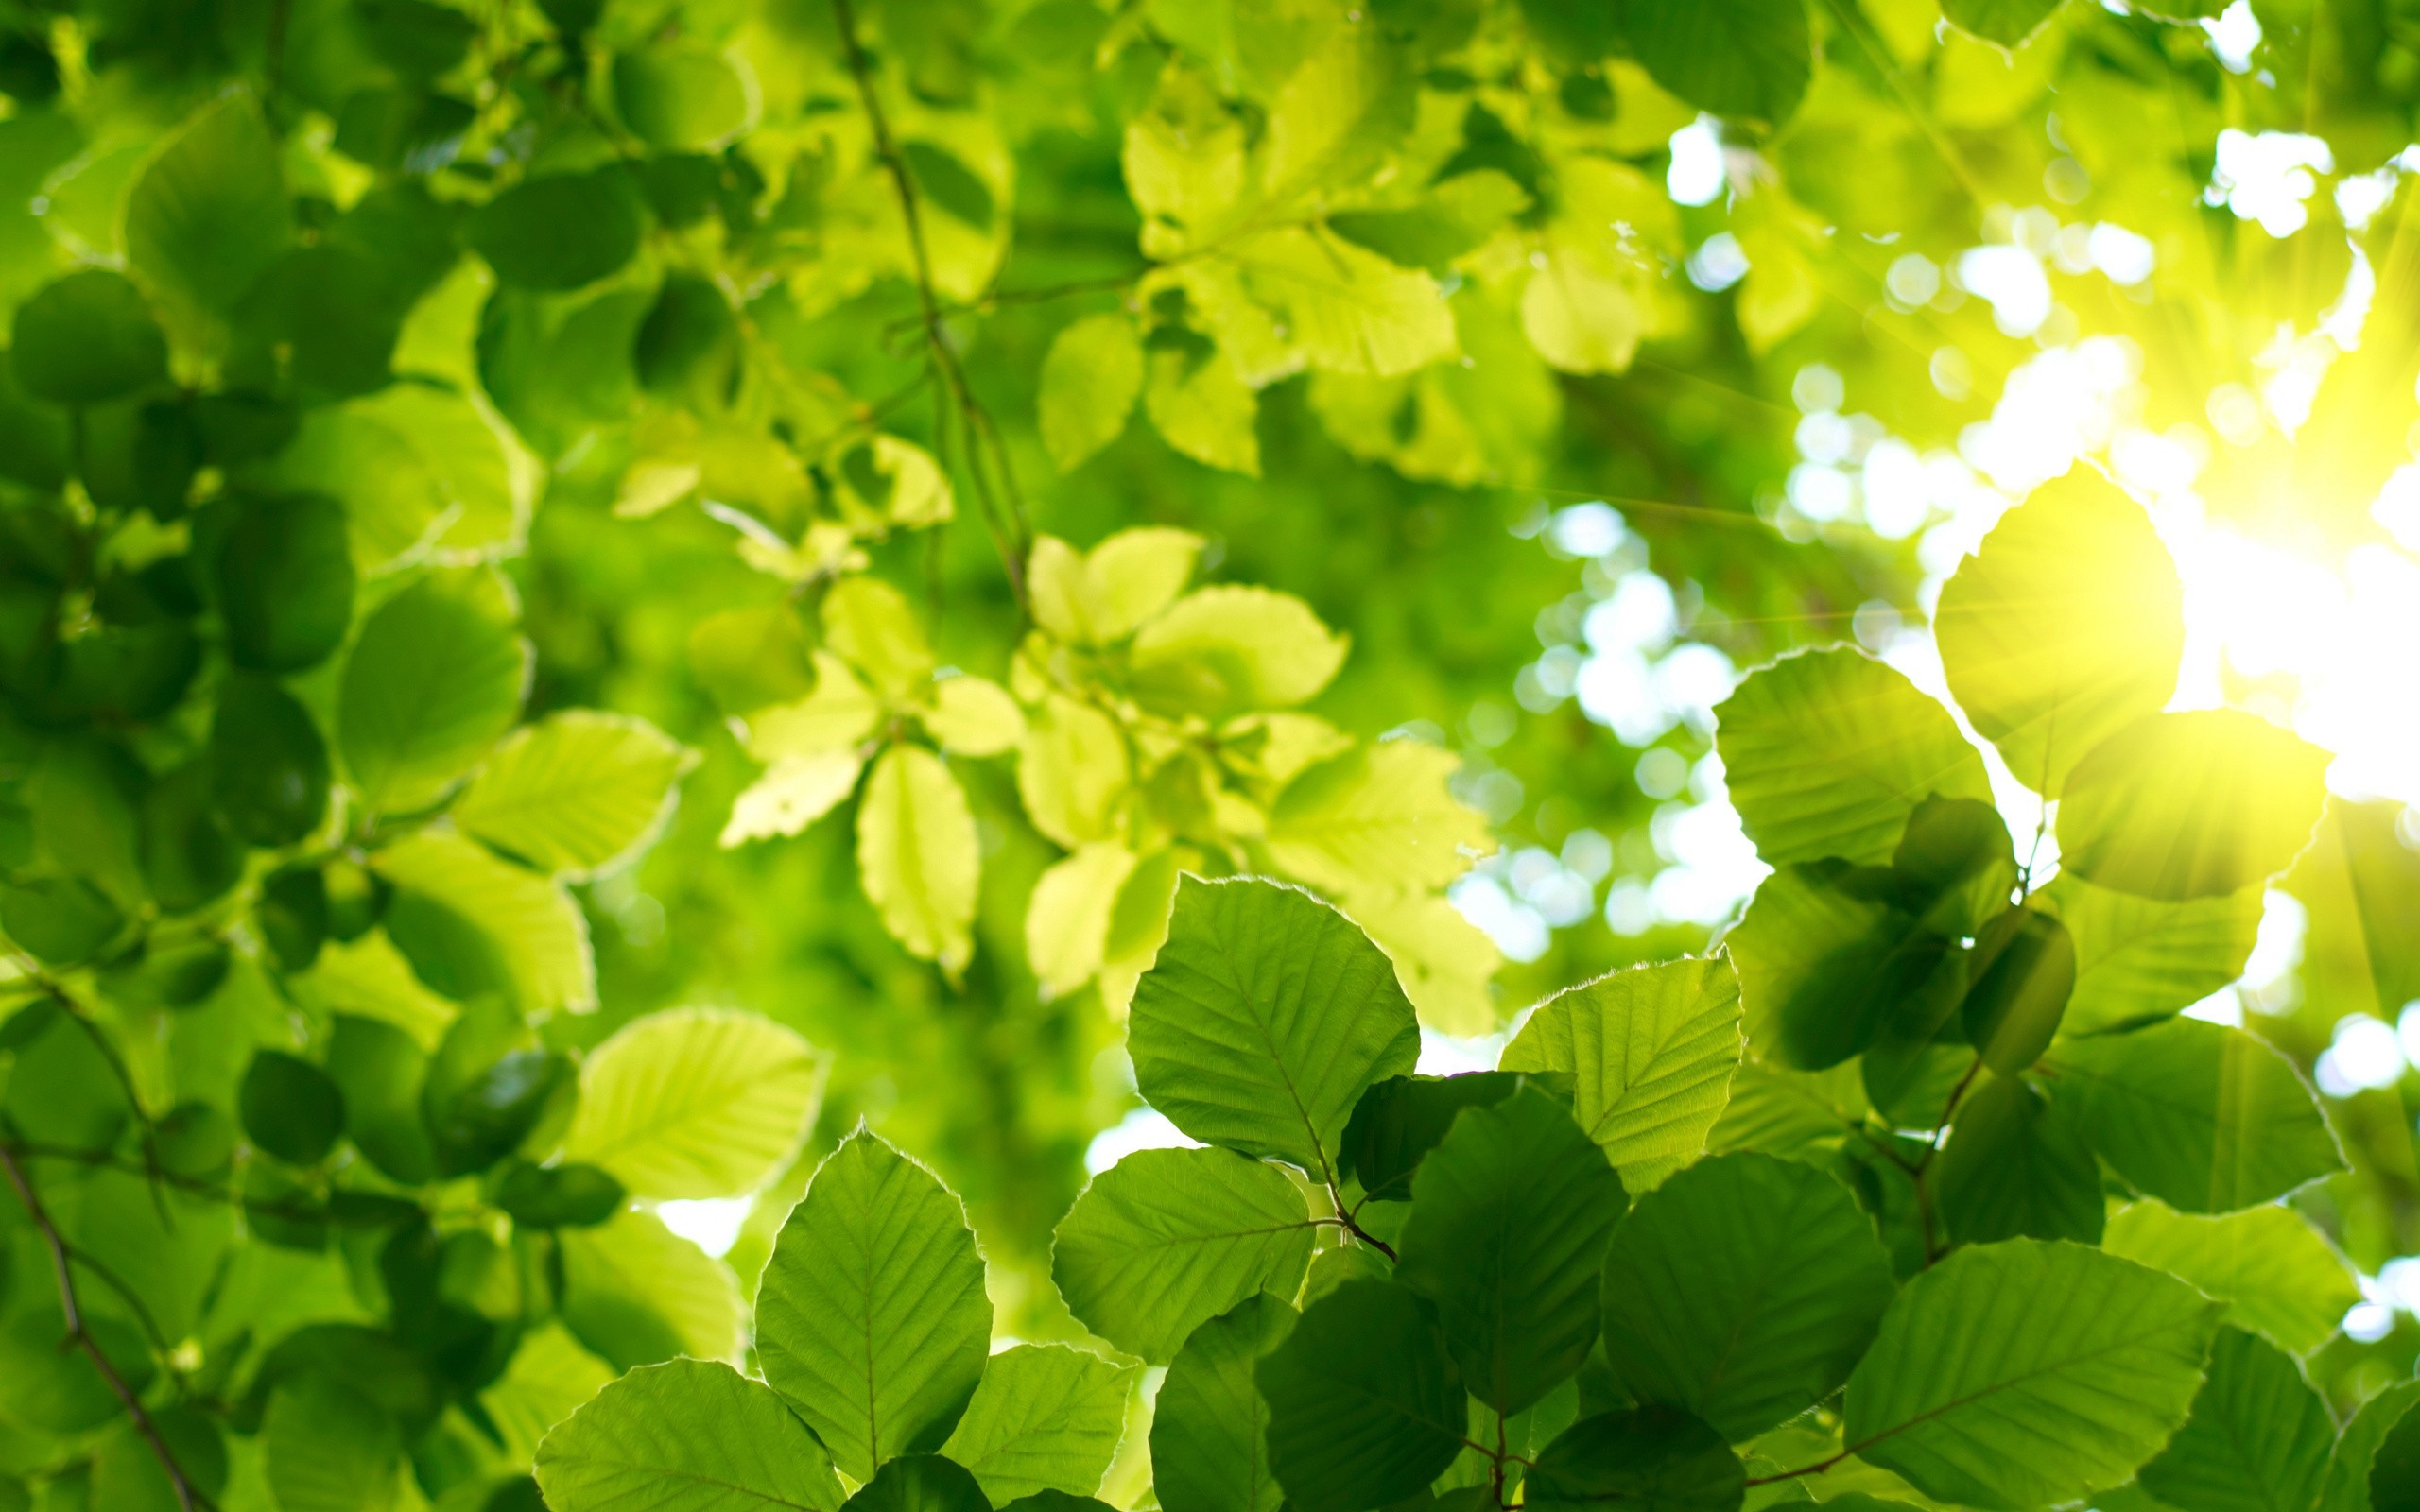 General 2560x1600 nature plants photography leaves sunlight